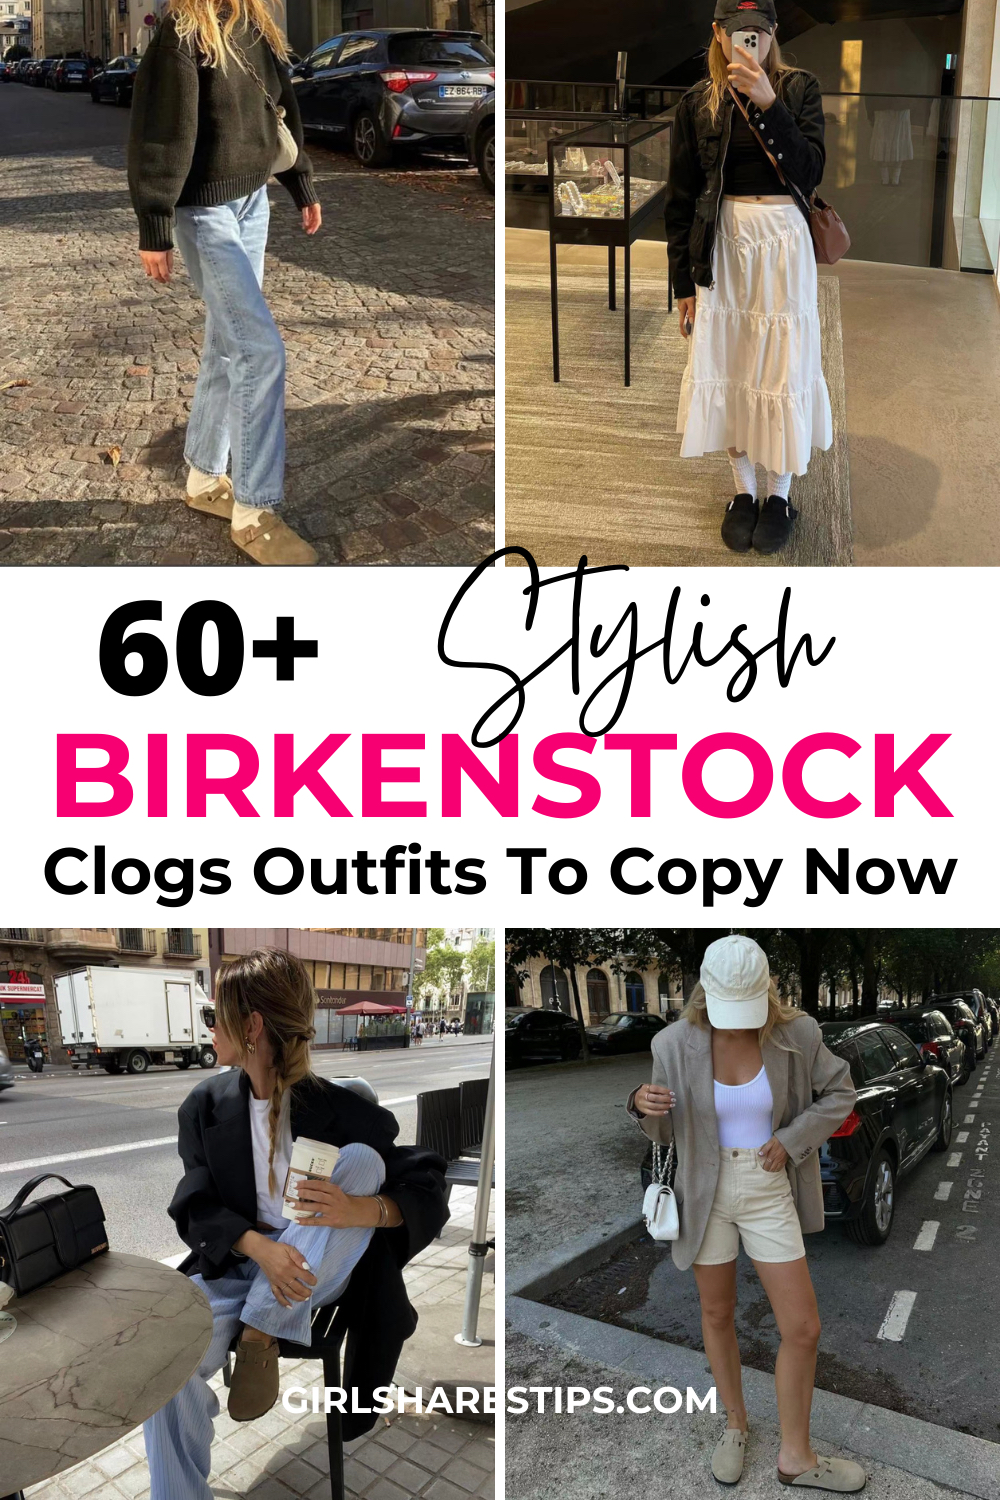 birkenstock clogs outfits collage